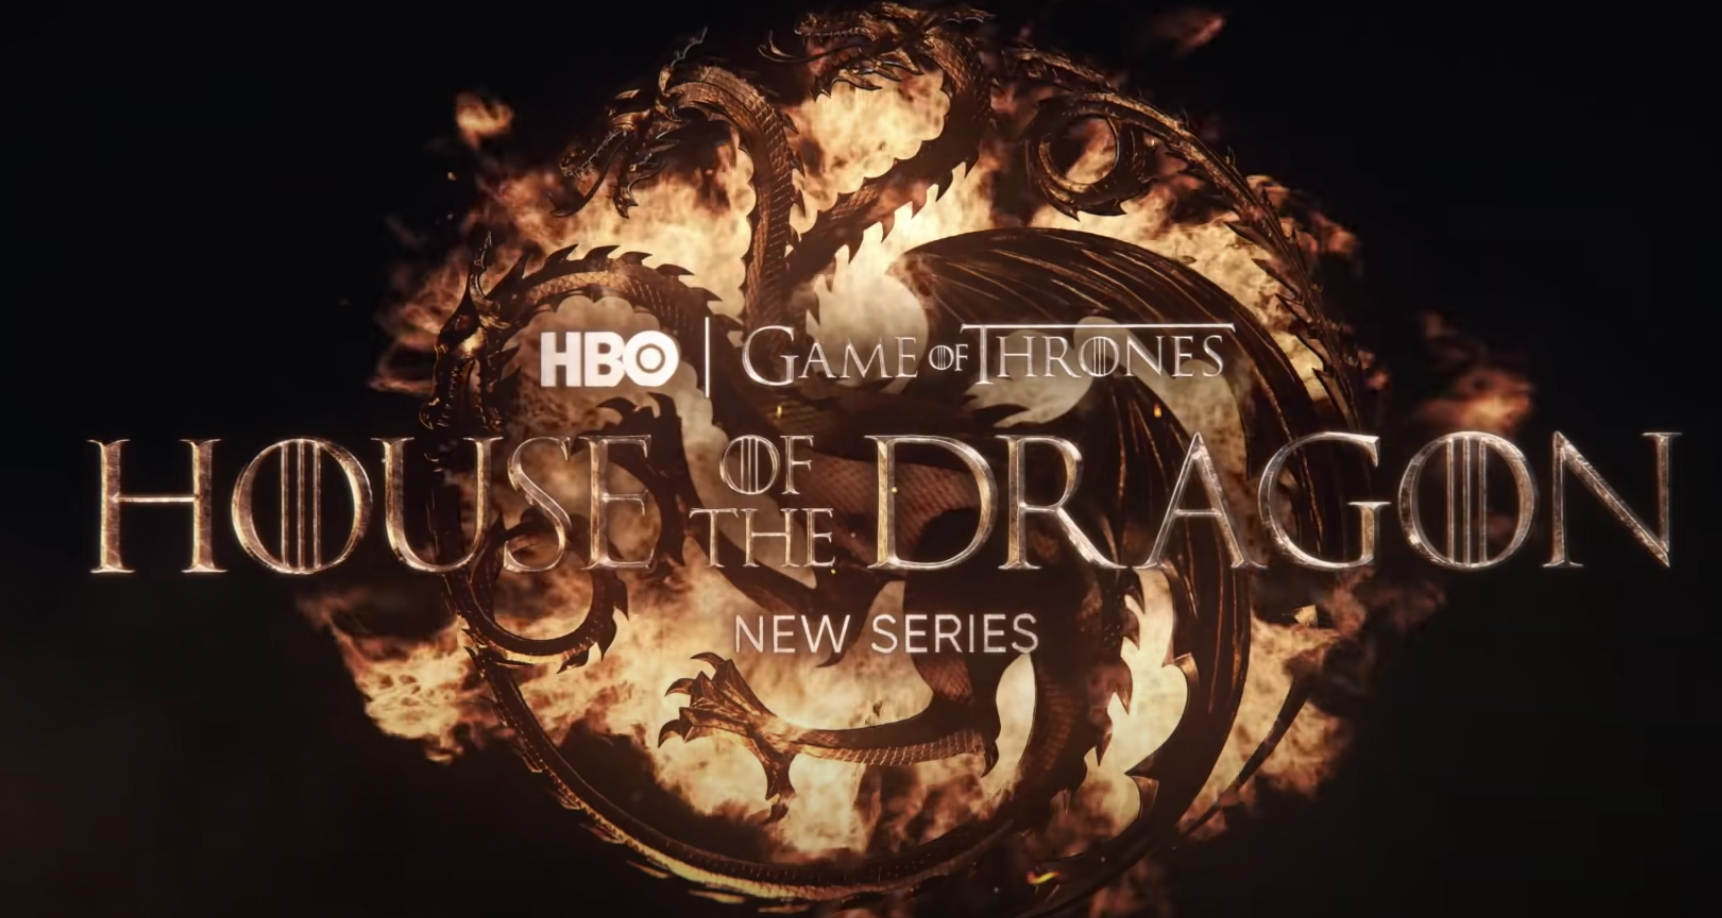 Game of Thrones' Prequel 'House of the Dragon' Adds Seven to Cast